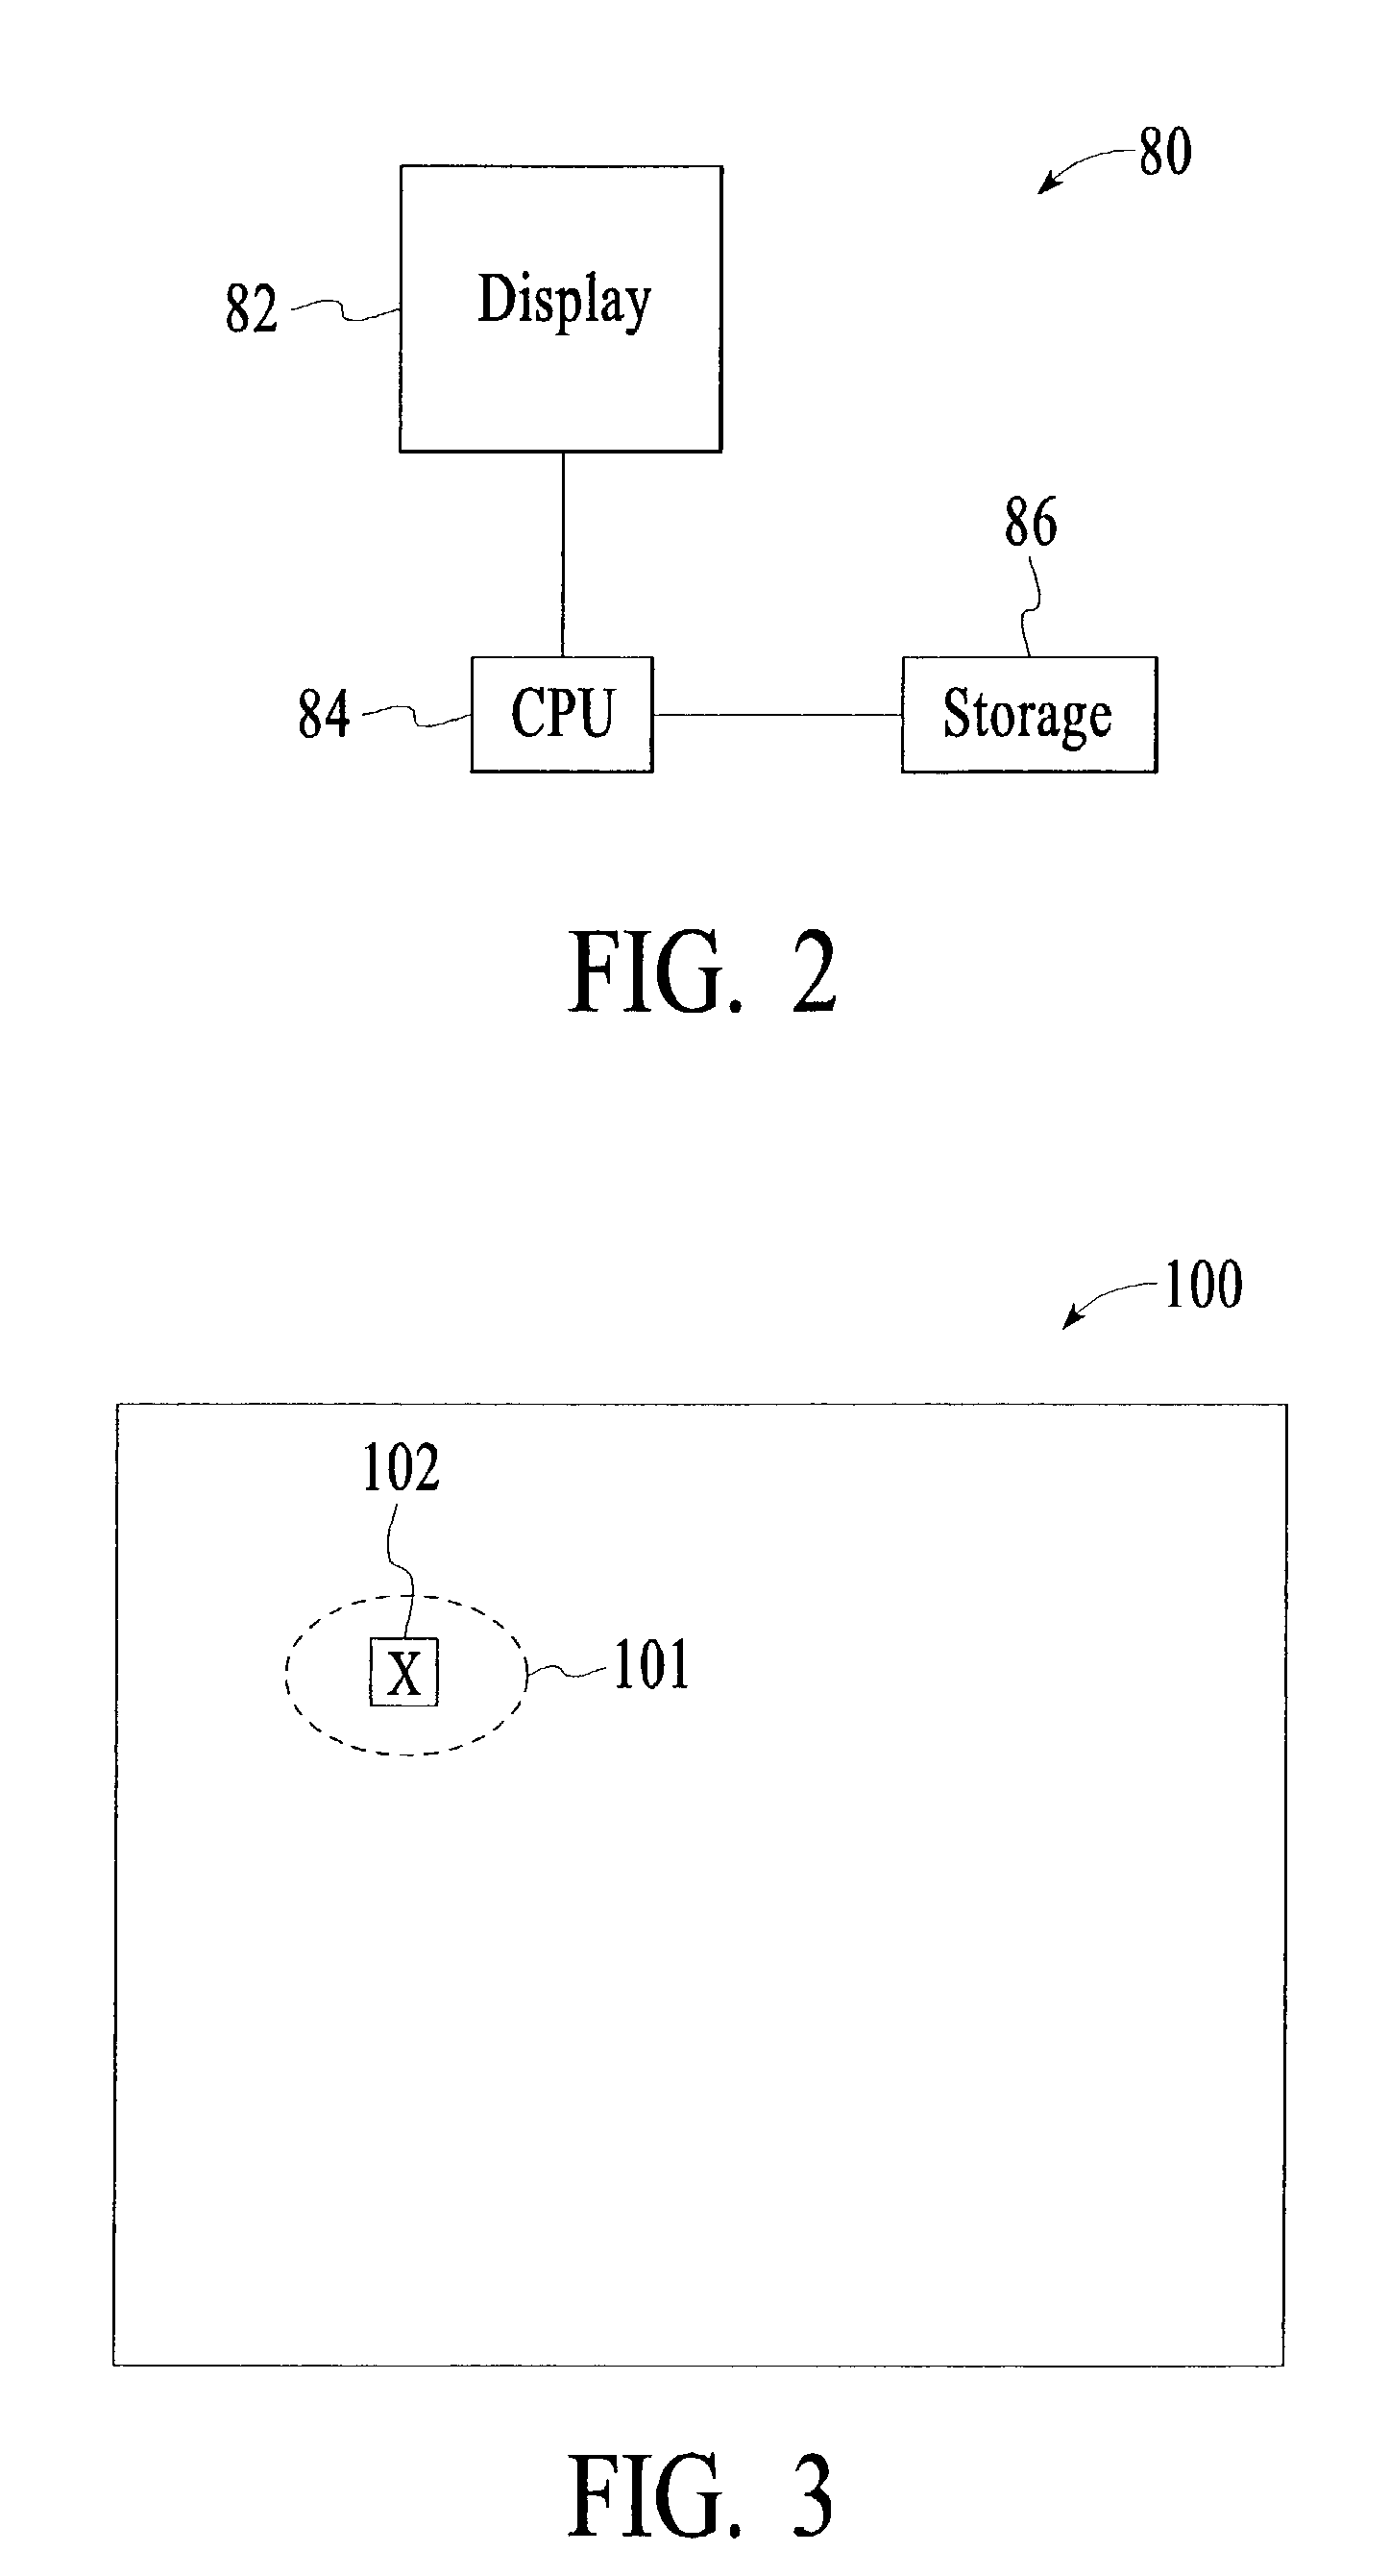 System and method for consolidating associated buttons into easily accessible groups